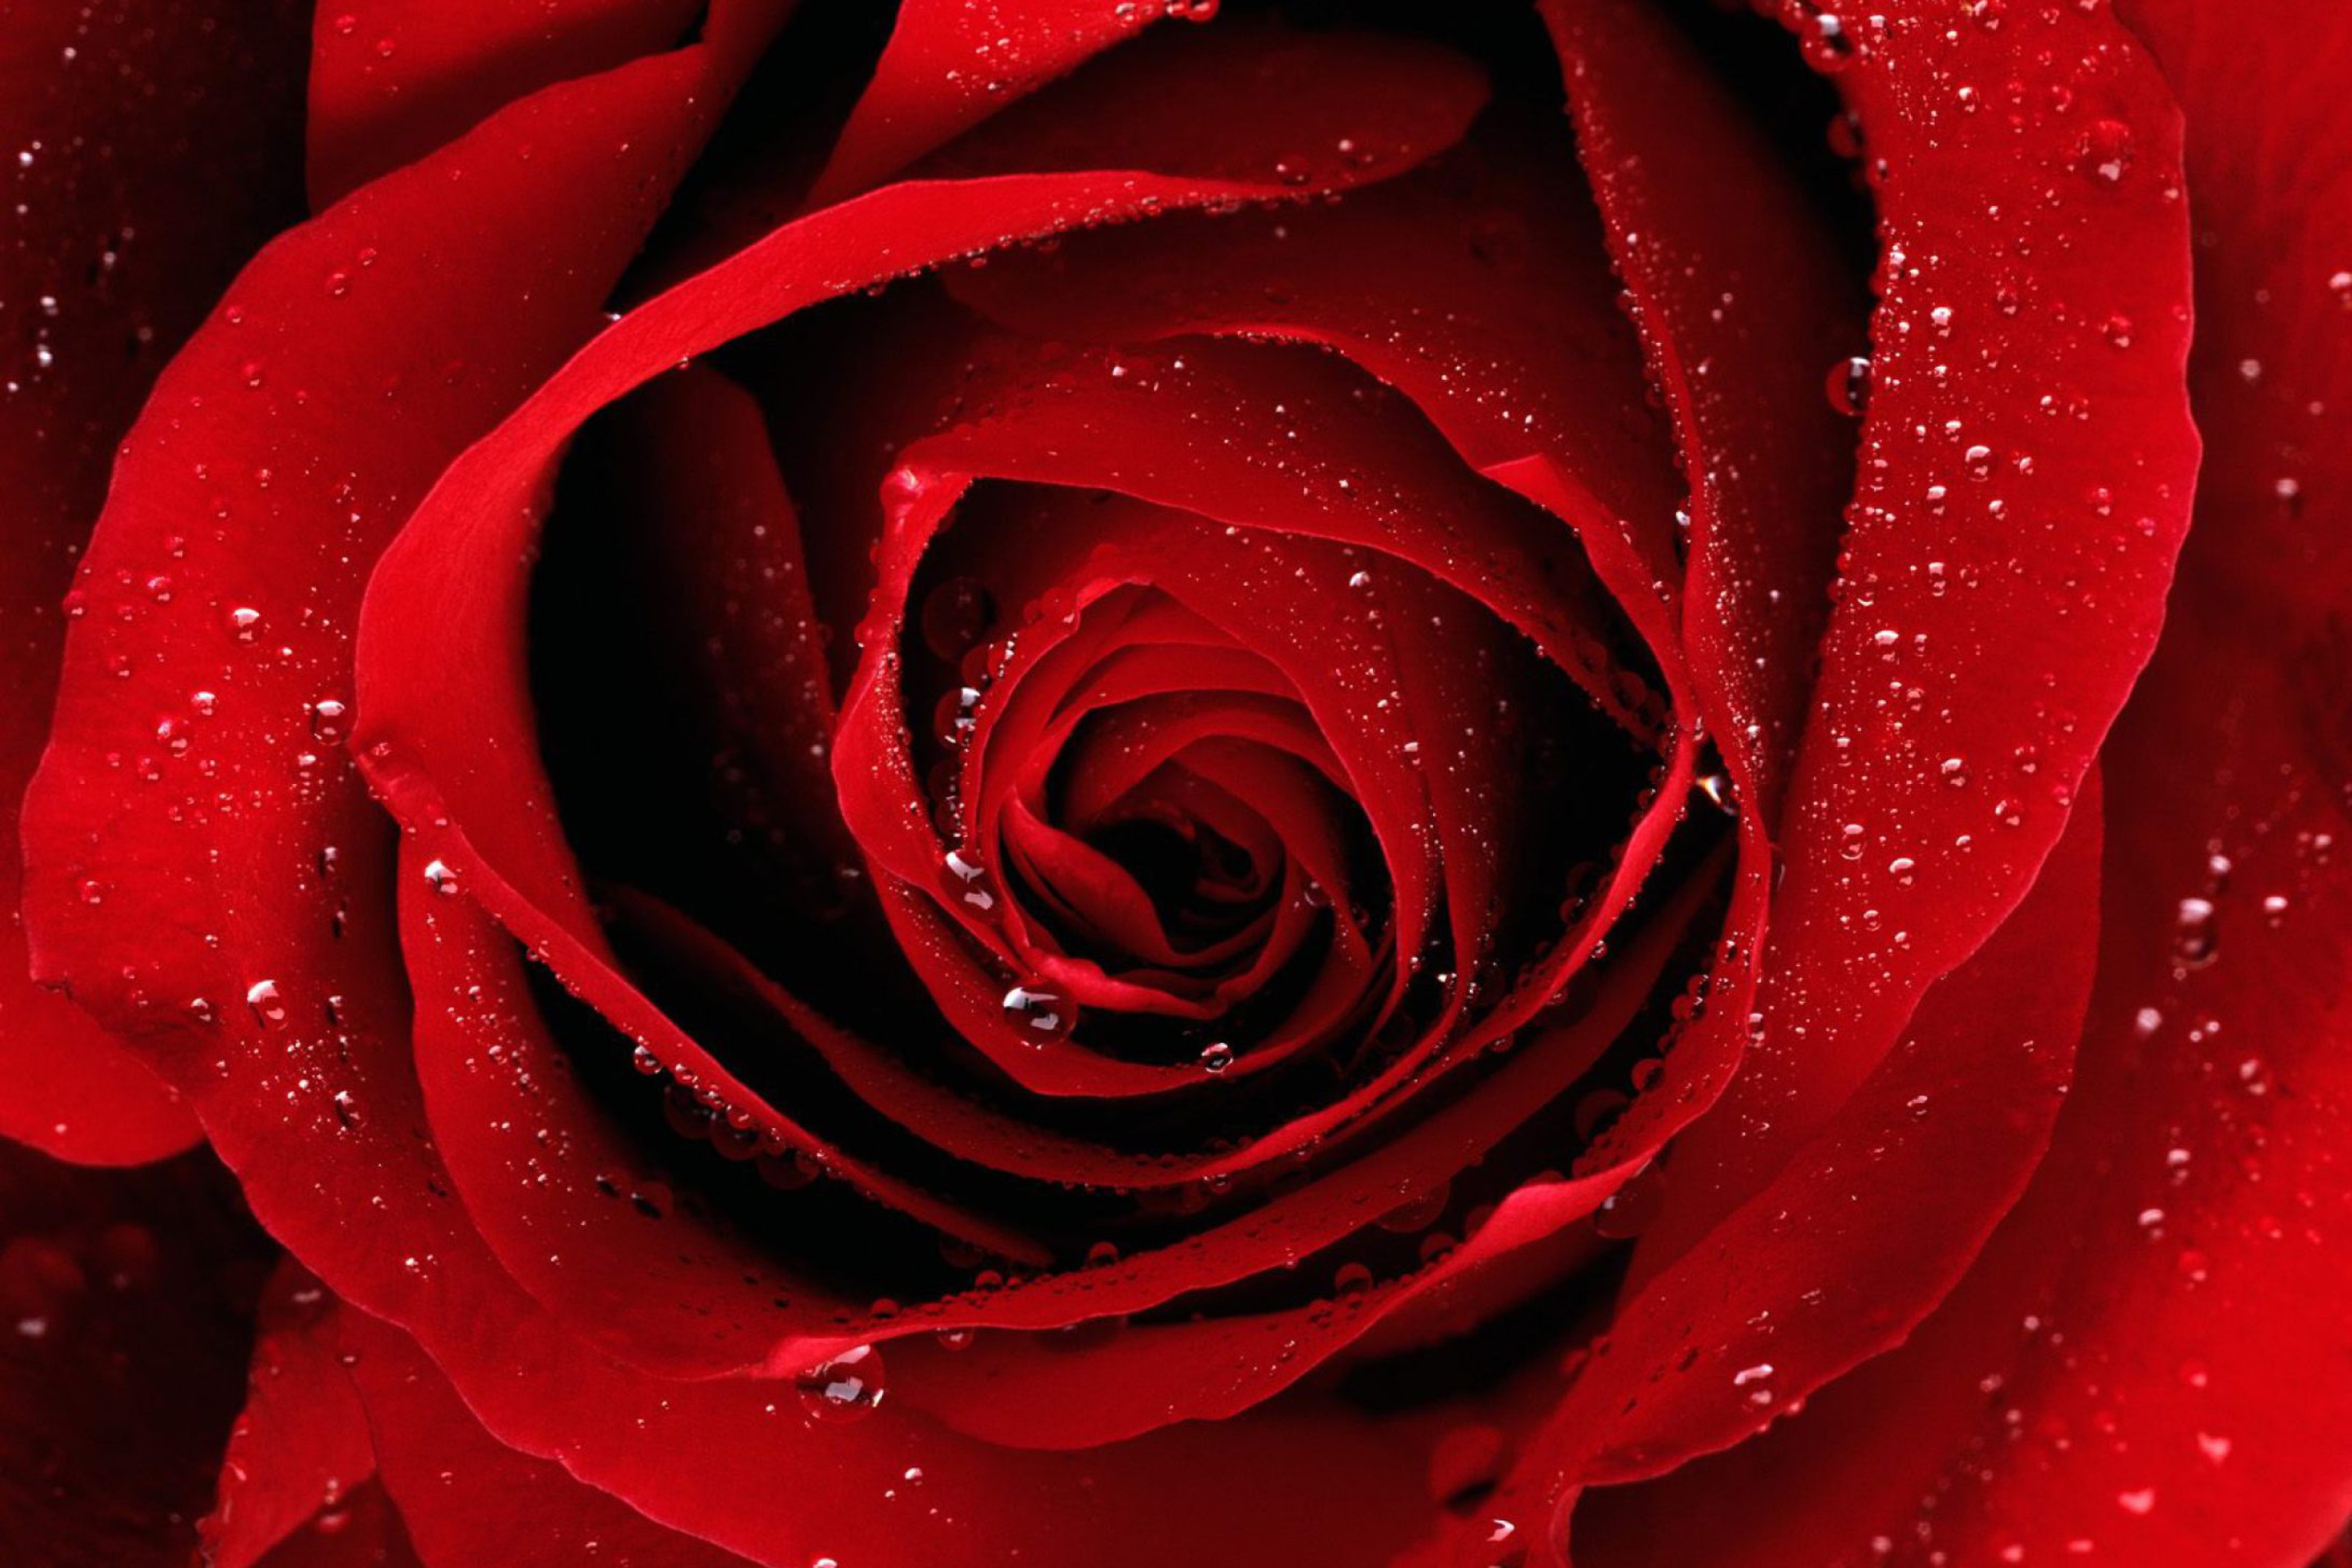 Scarlet Rose With Water Drops wallpaper 2880x1920